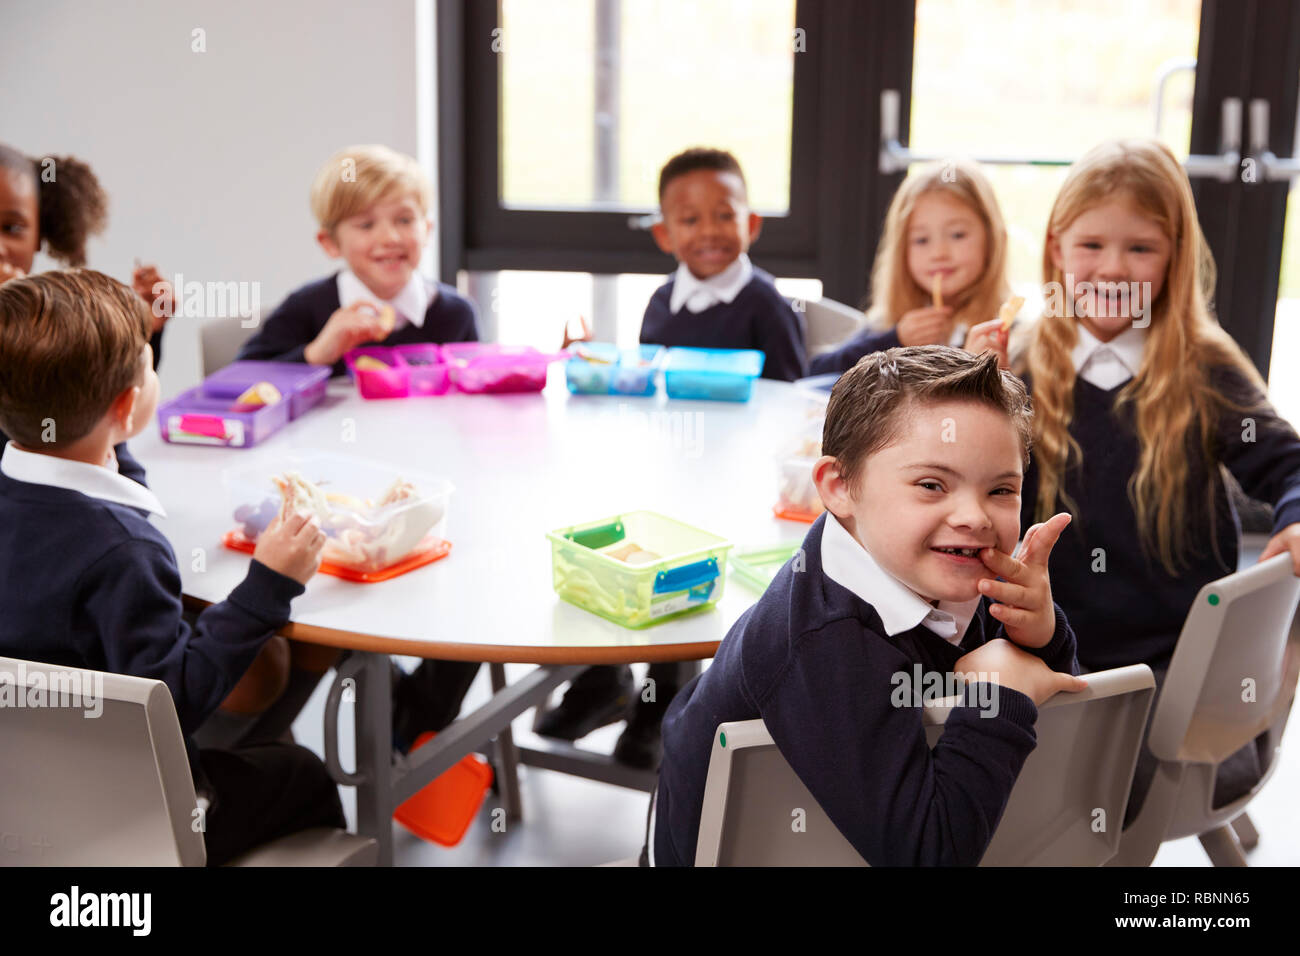 Elevated view of primary school kids sitting together at a round table to eat their packed lunches, some turning around to face the camera Stock Photo